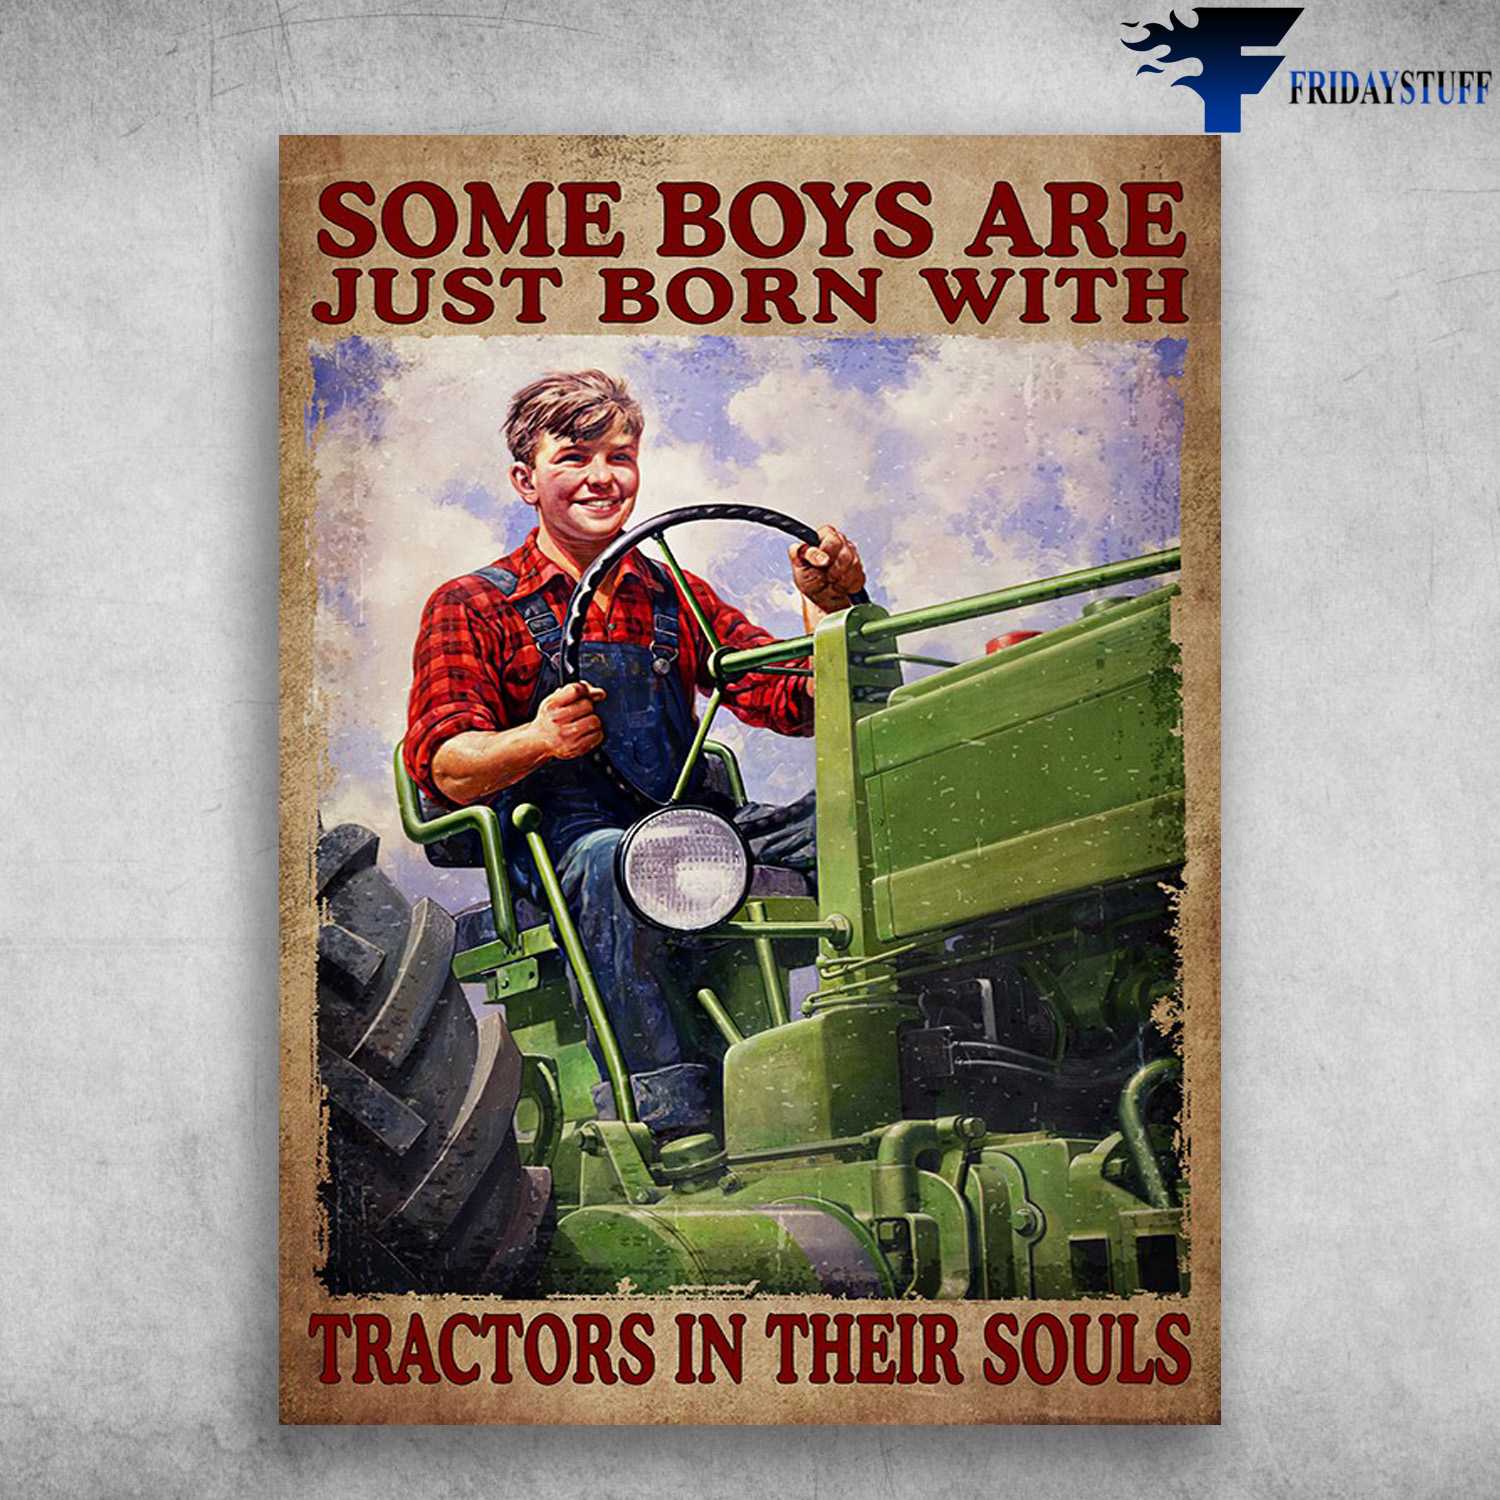 Tractor Driver, Farmer Poster - Some Boys Are Just Born With, Tractors In Their Souls